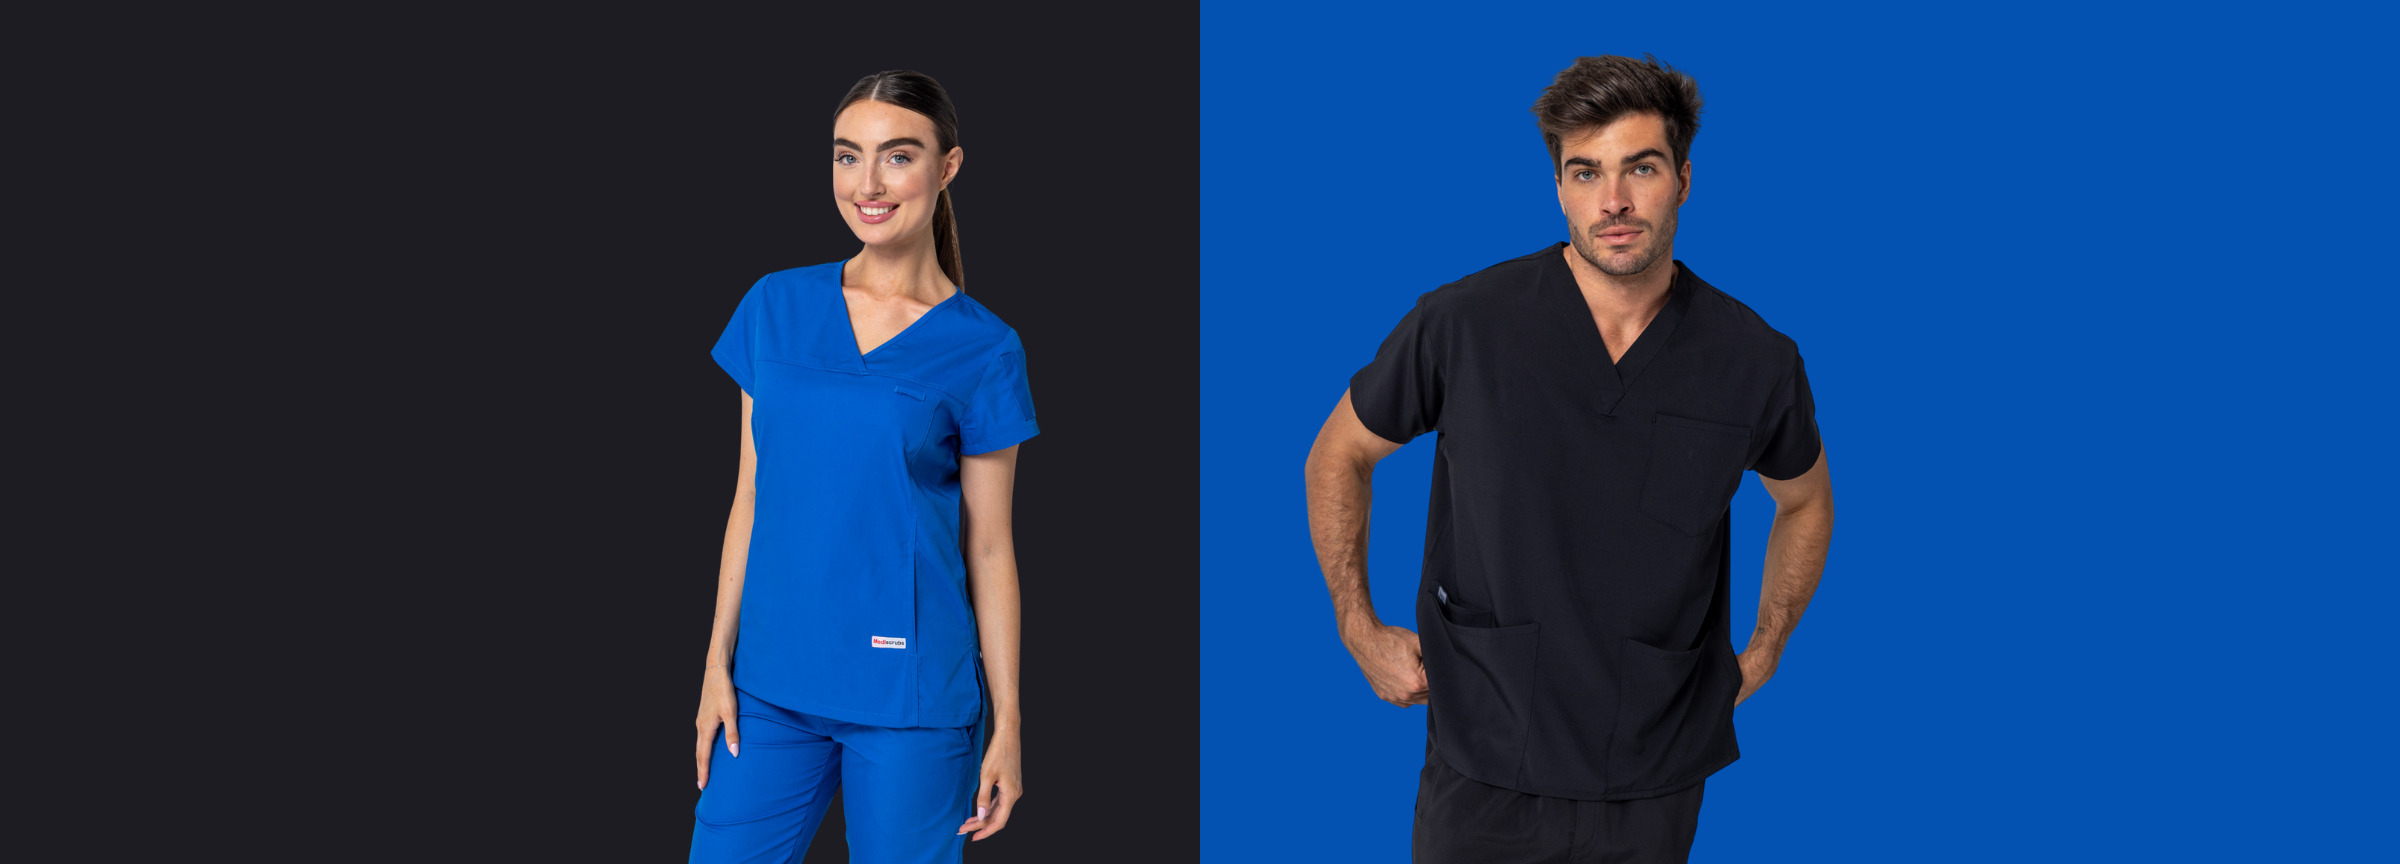 Sale 20% OFF LILAC SCRUBS AND 20% OFF CARIBBEAN SCRUBS